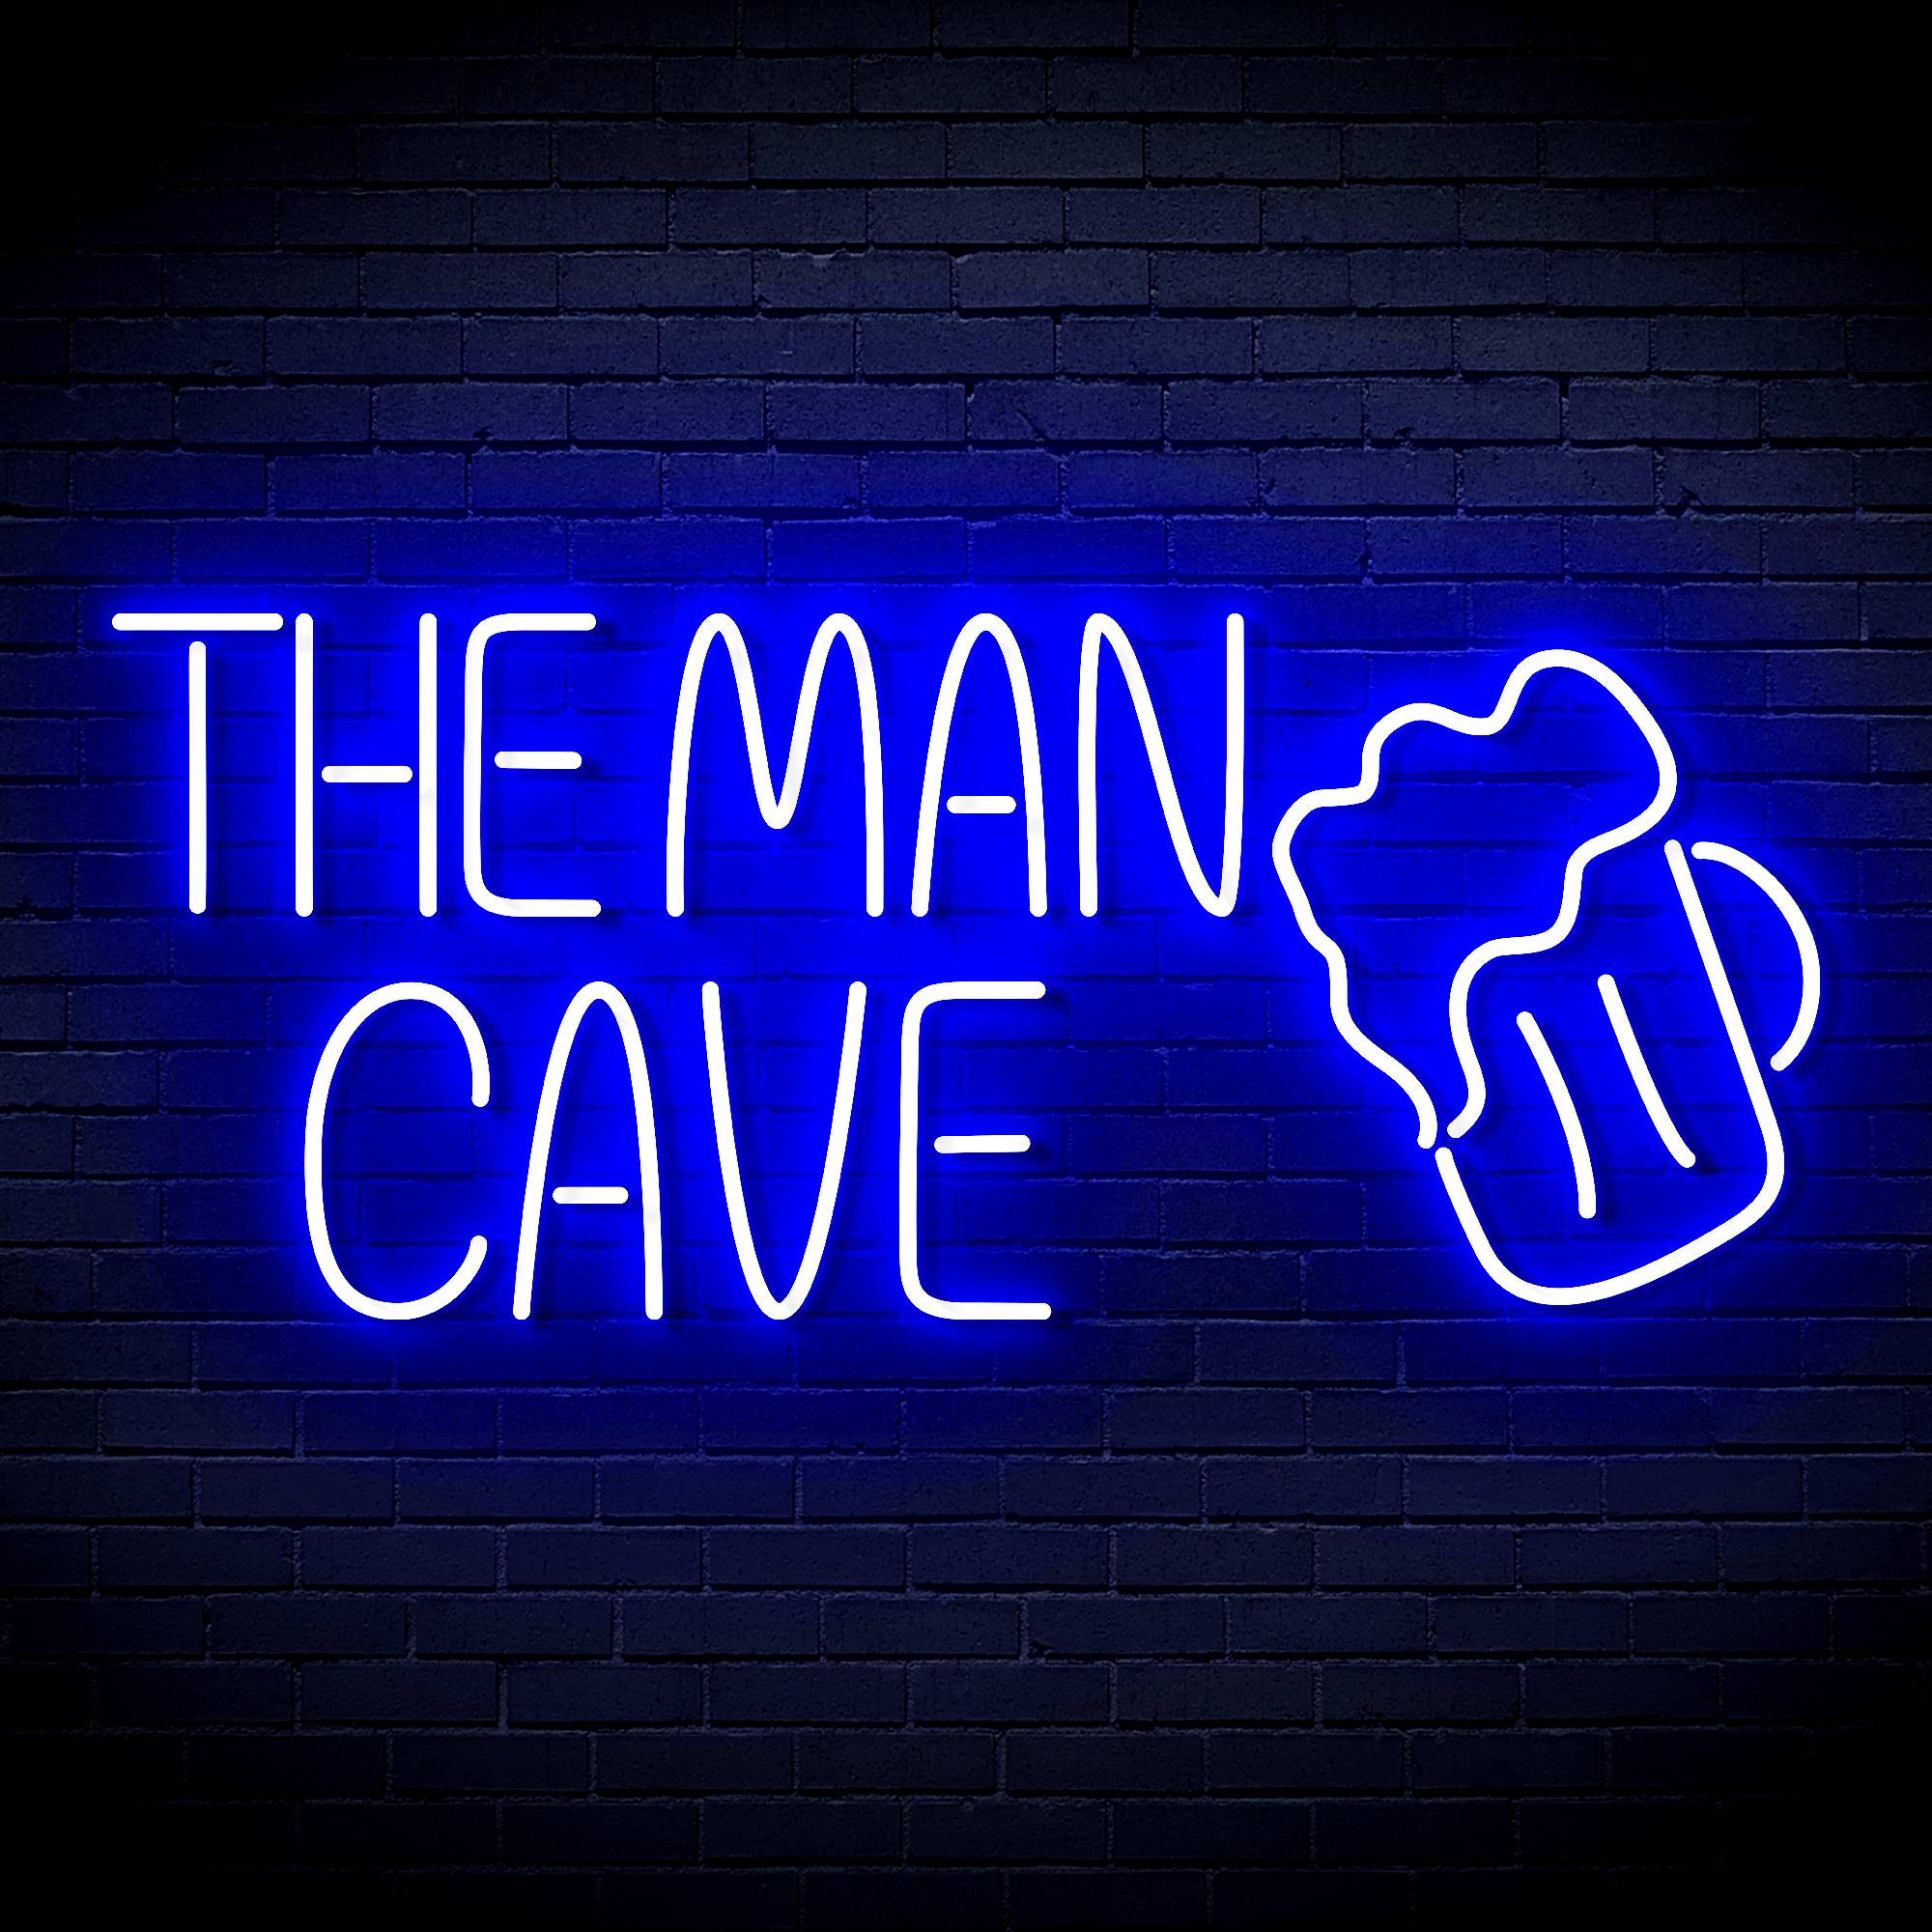 The Man Cave with Beer Mug LED Neon Sign